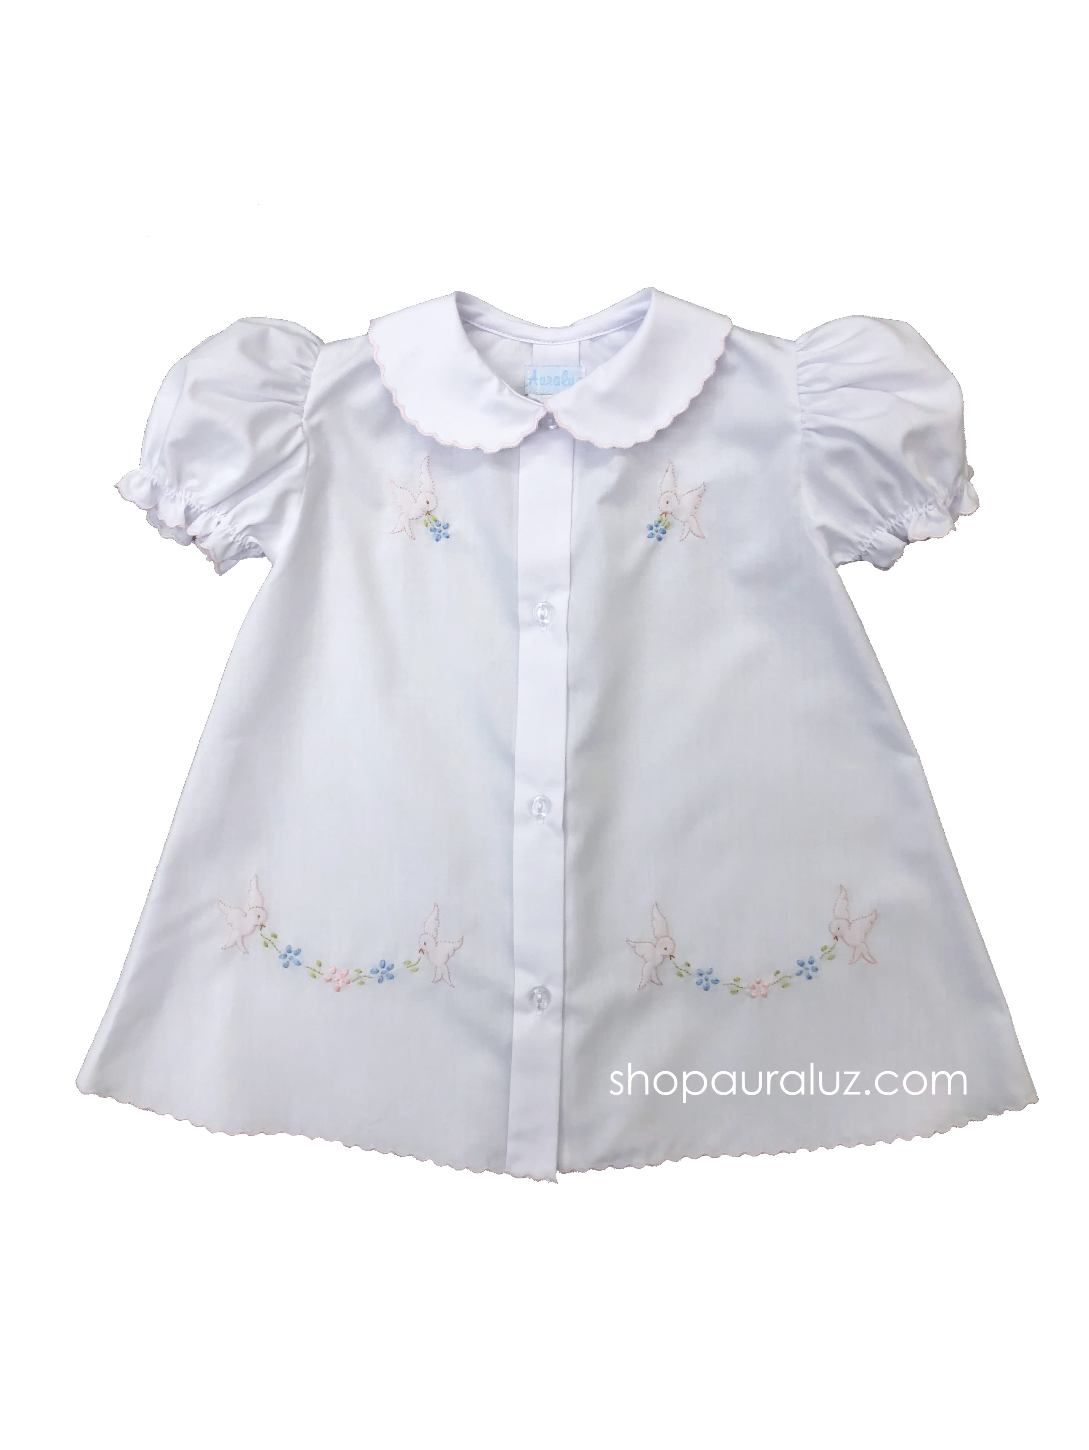 Auraluz Day Gown..White with pink scallops, p.p.collar and embroidered birds